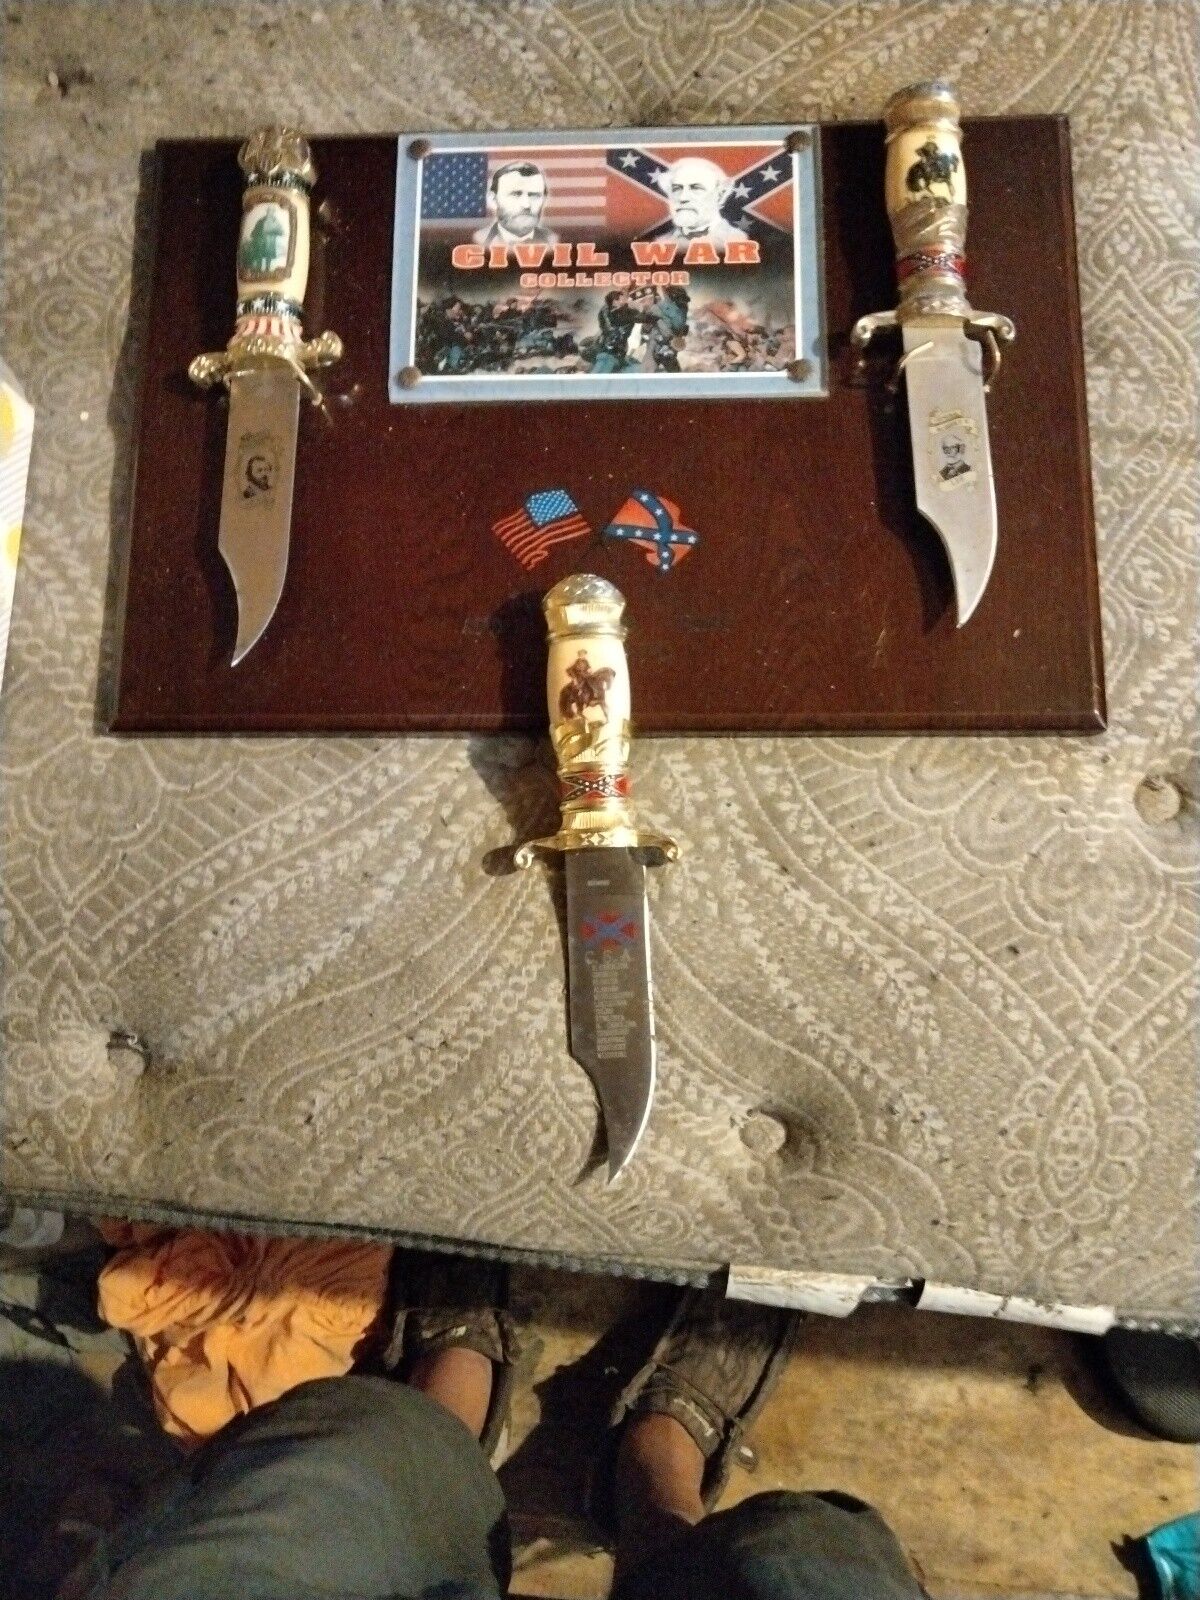 Civil War Bowie Knife Collector Set Generals Lee & Grant on Plaque Exc Cond